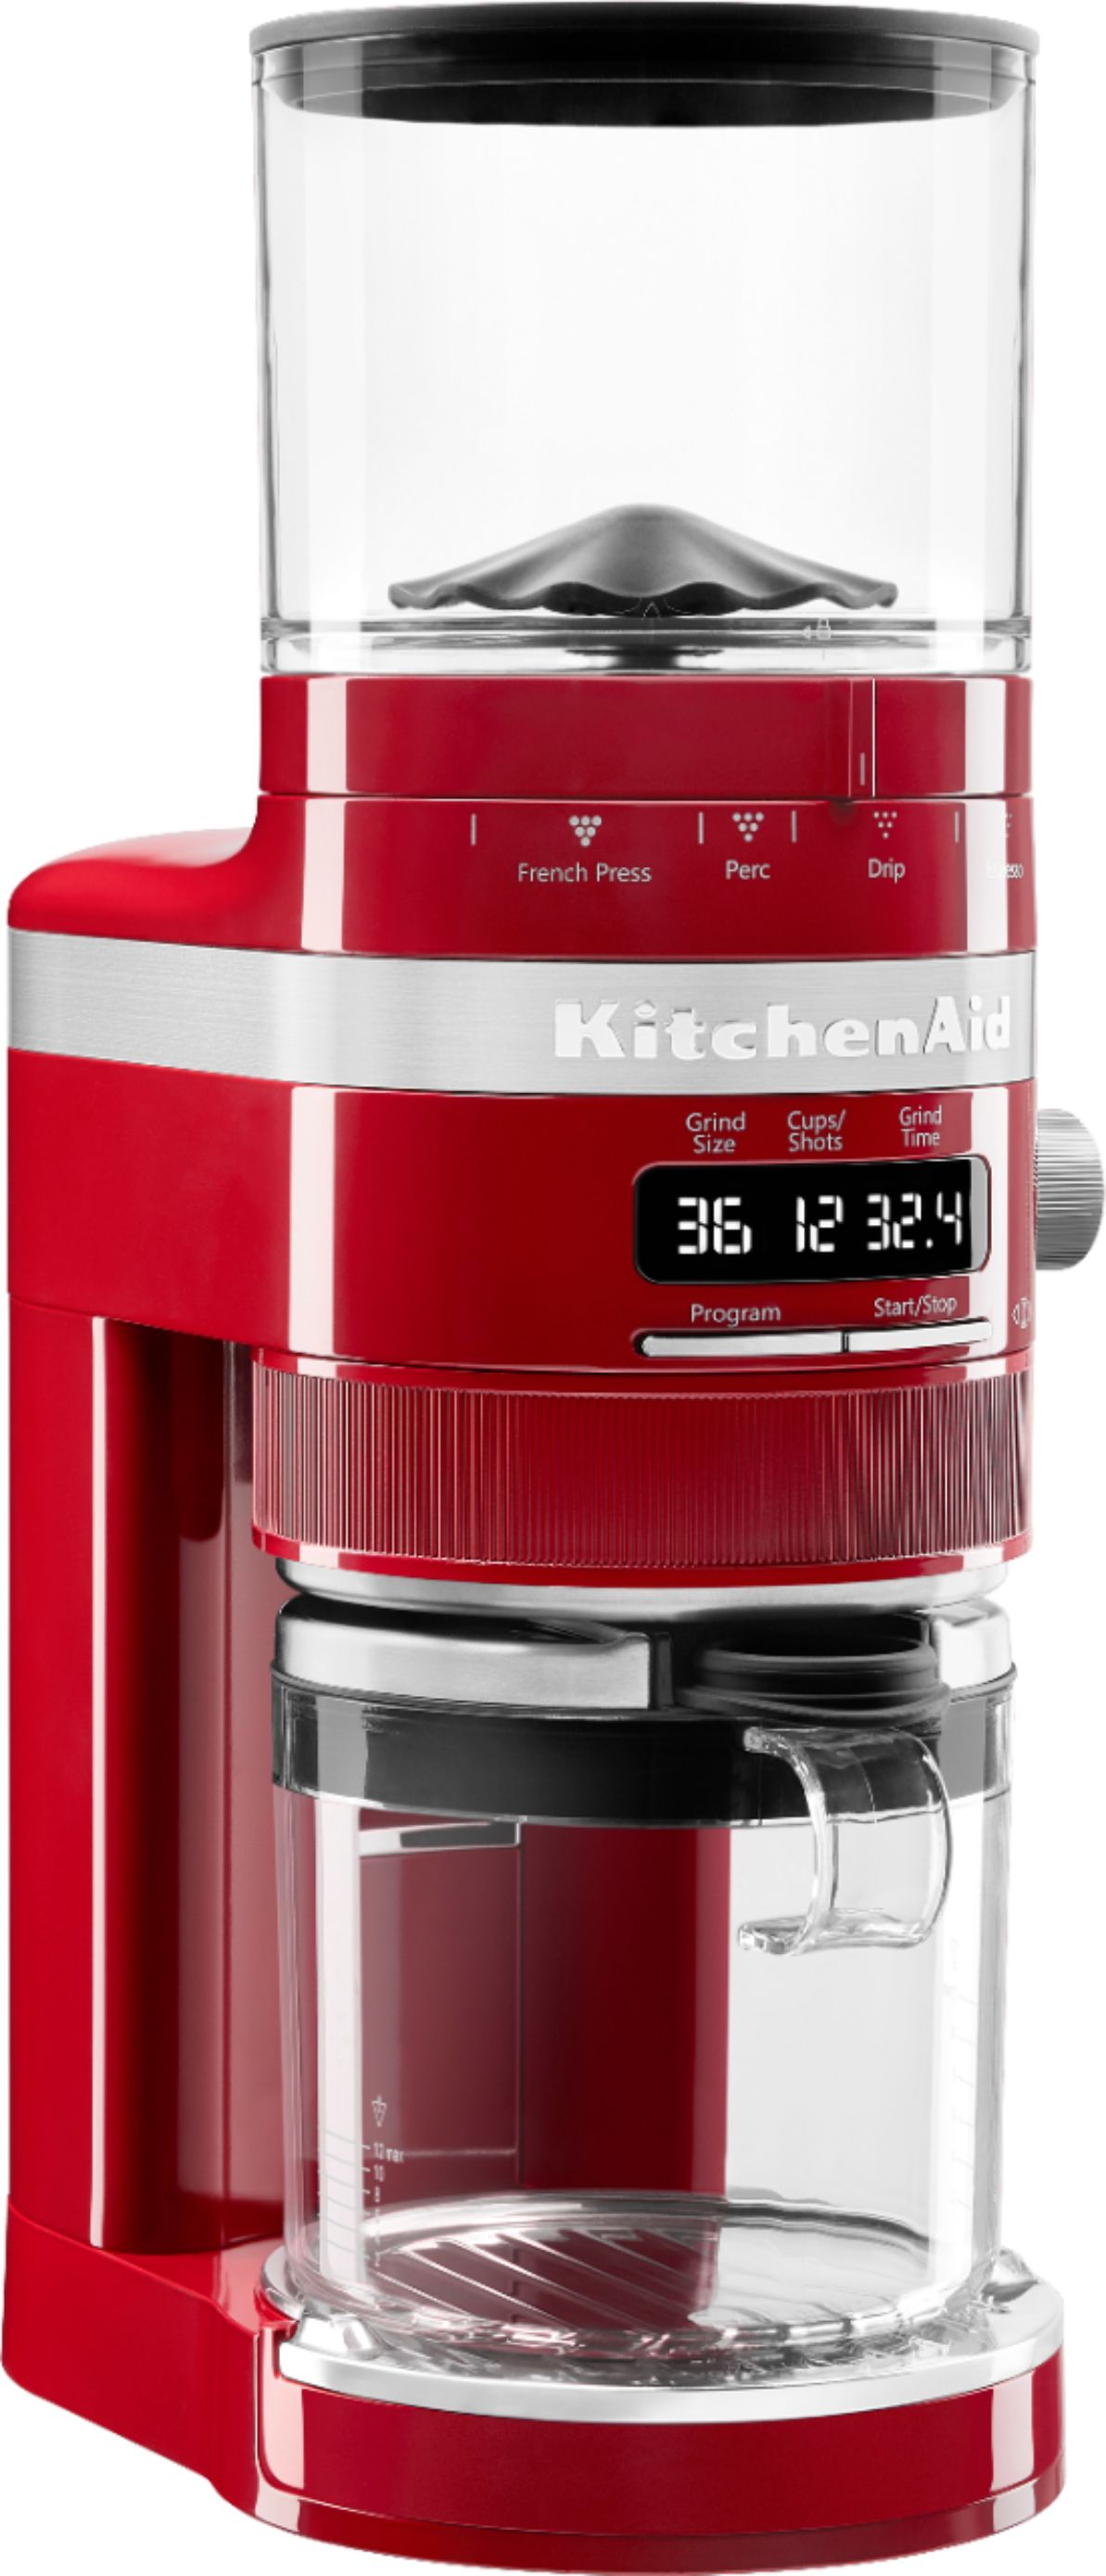 Red and Stainless Steel Kitchenaid 12 Cups Coffee Maker 